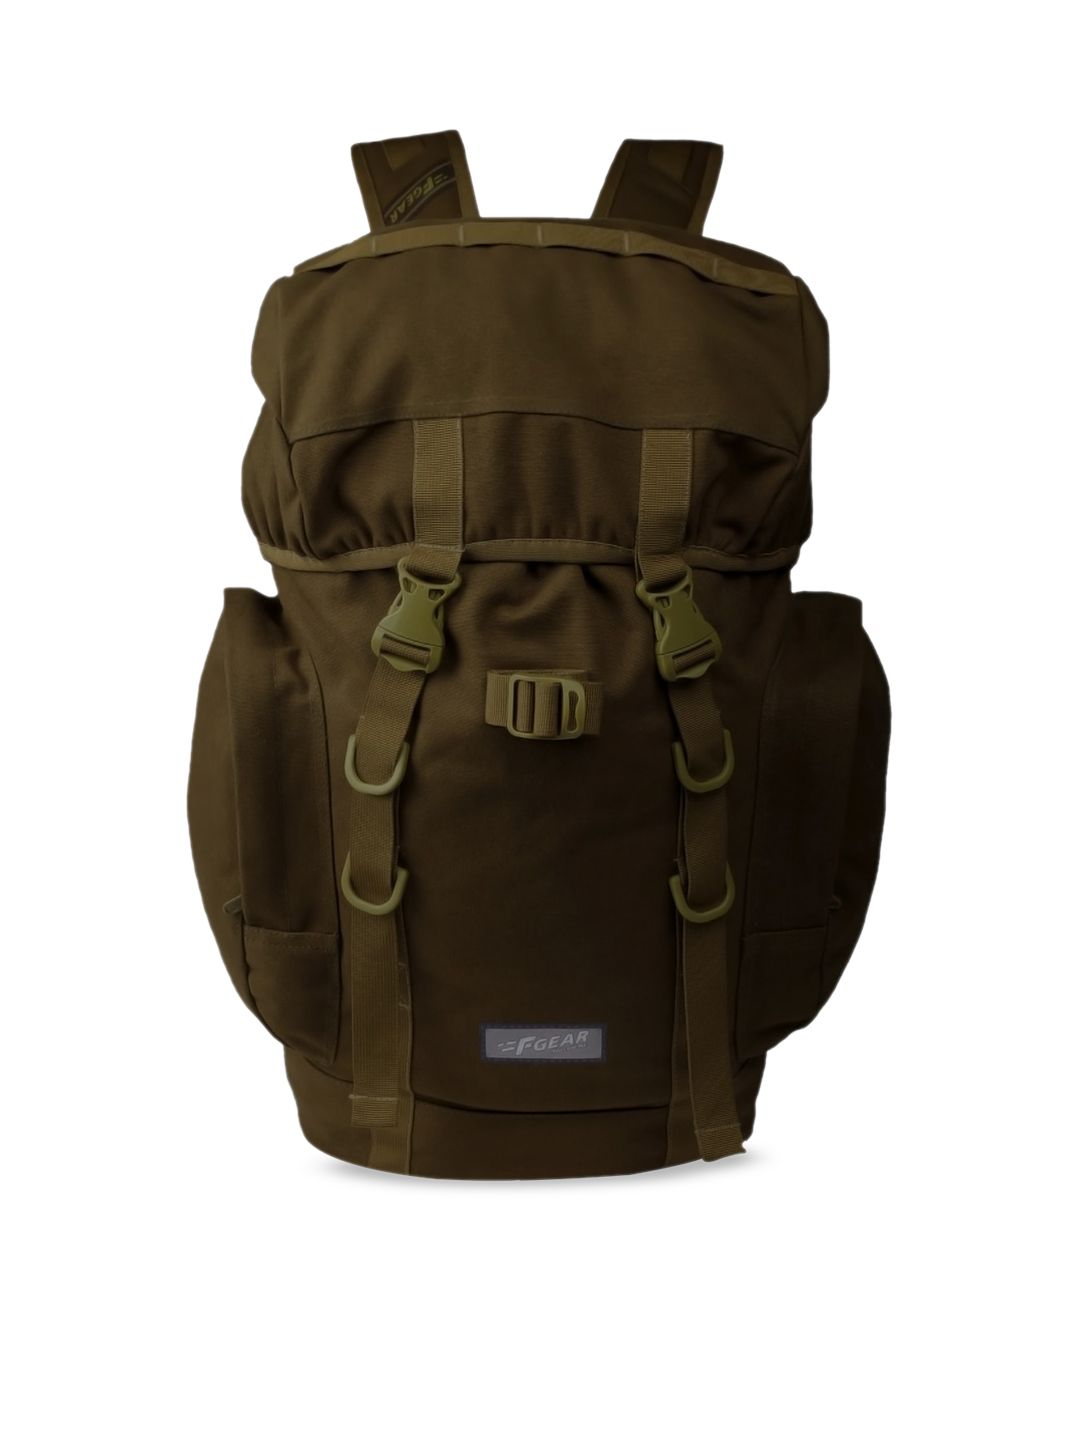 F Gear Unisex Olive Brown Solid Backpack Price in India